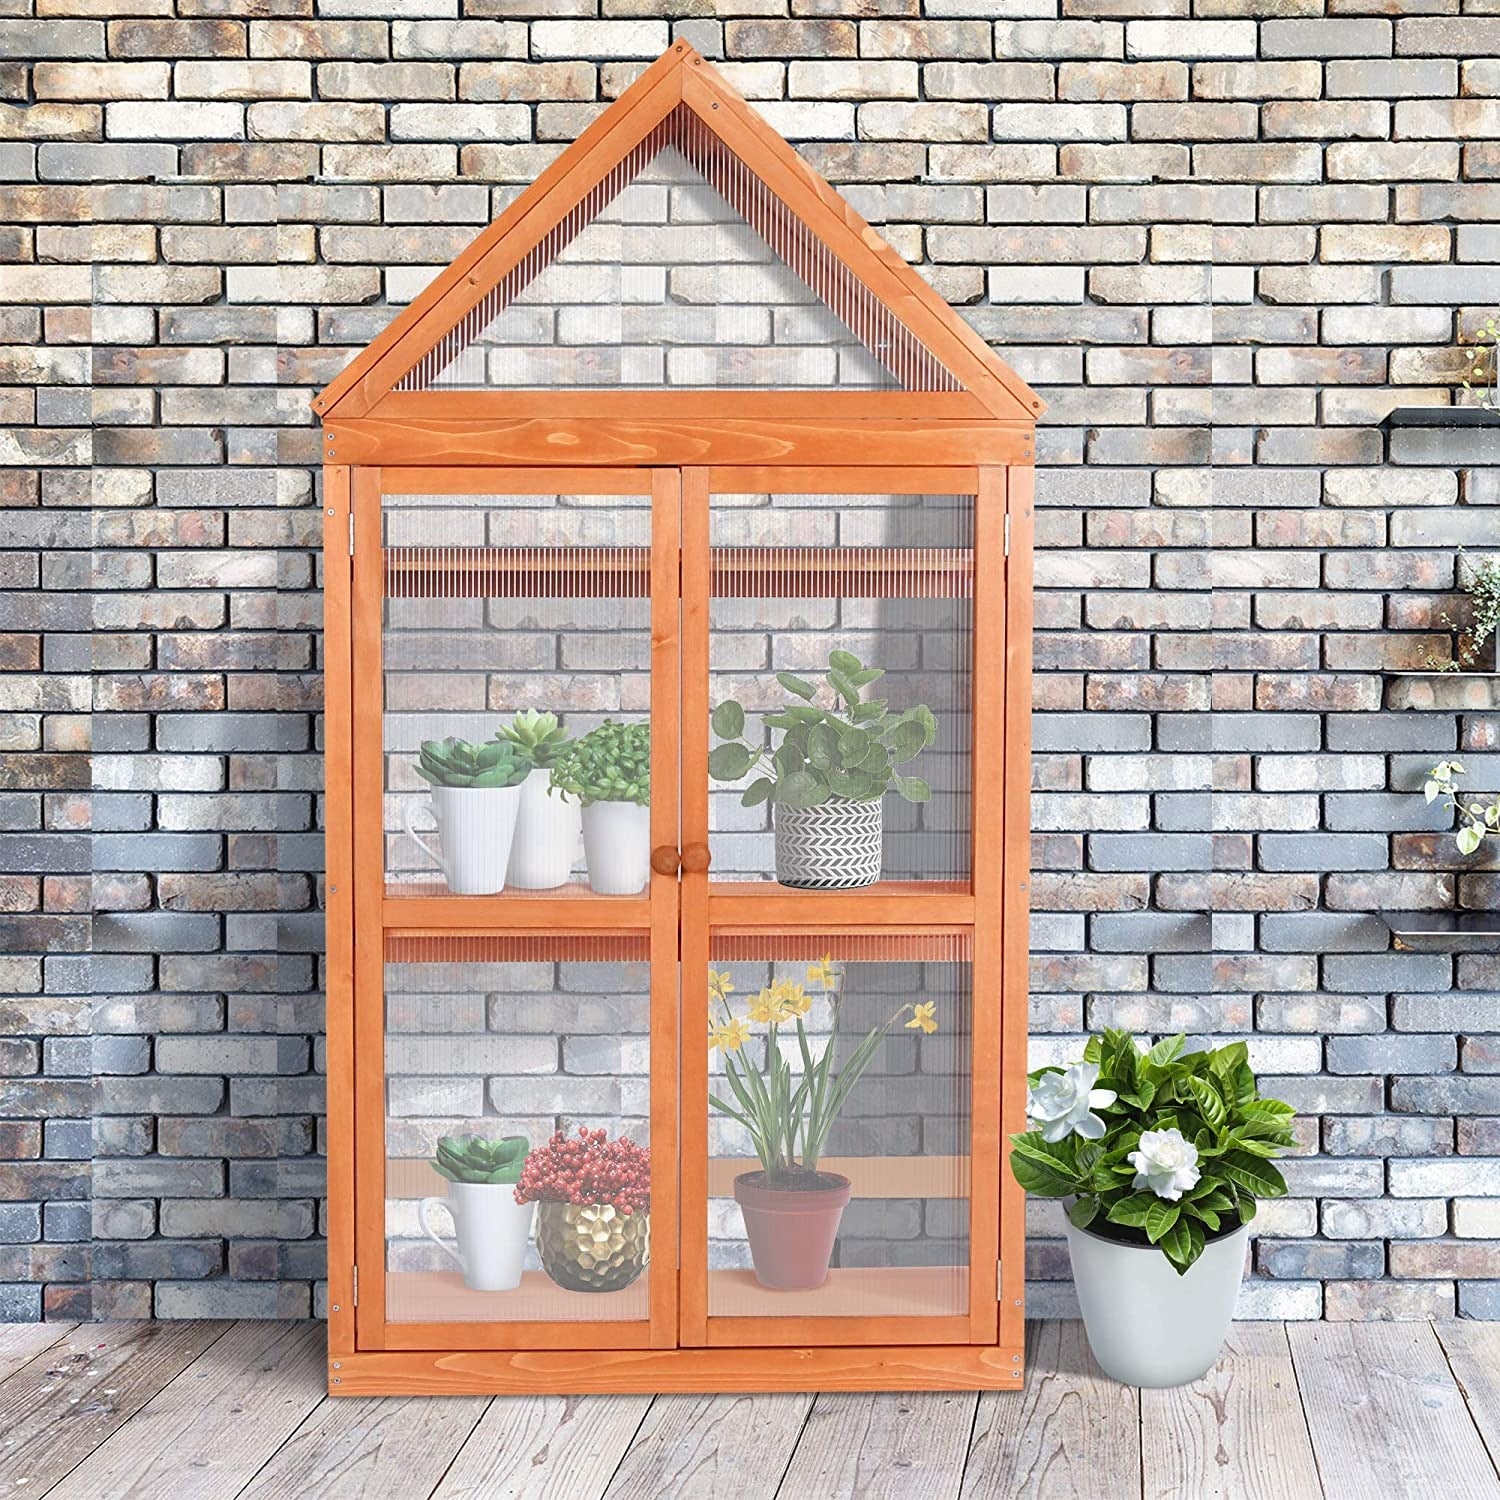 Raised Flower Planter Shelf Protection for Outdoor Indoor Use Garden Portable Mini Greenhouse Cabinet MCombo Greenhouse Wooden Cold Frame Greenhouse 